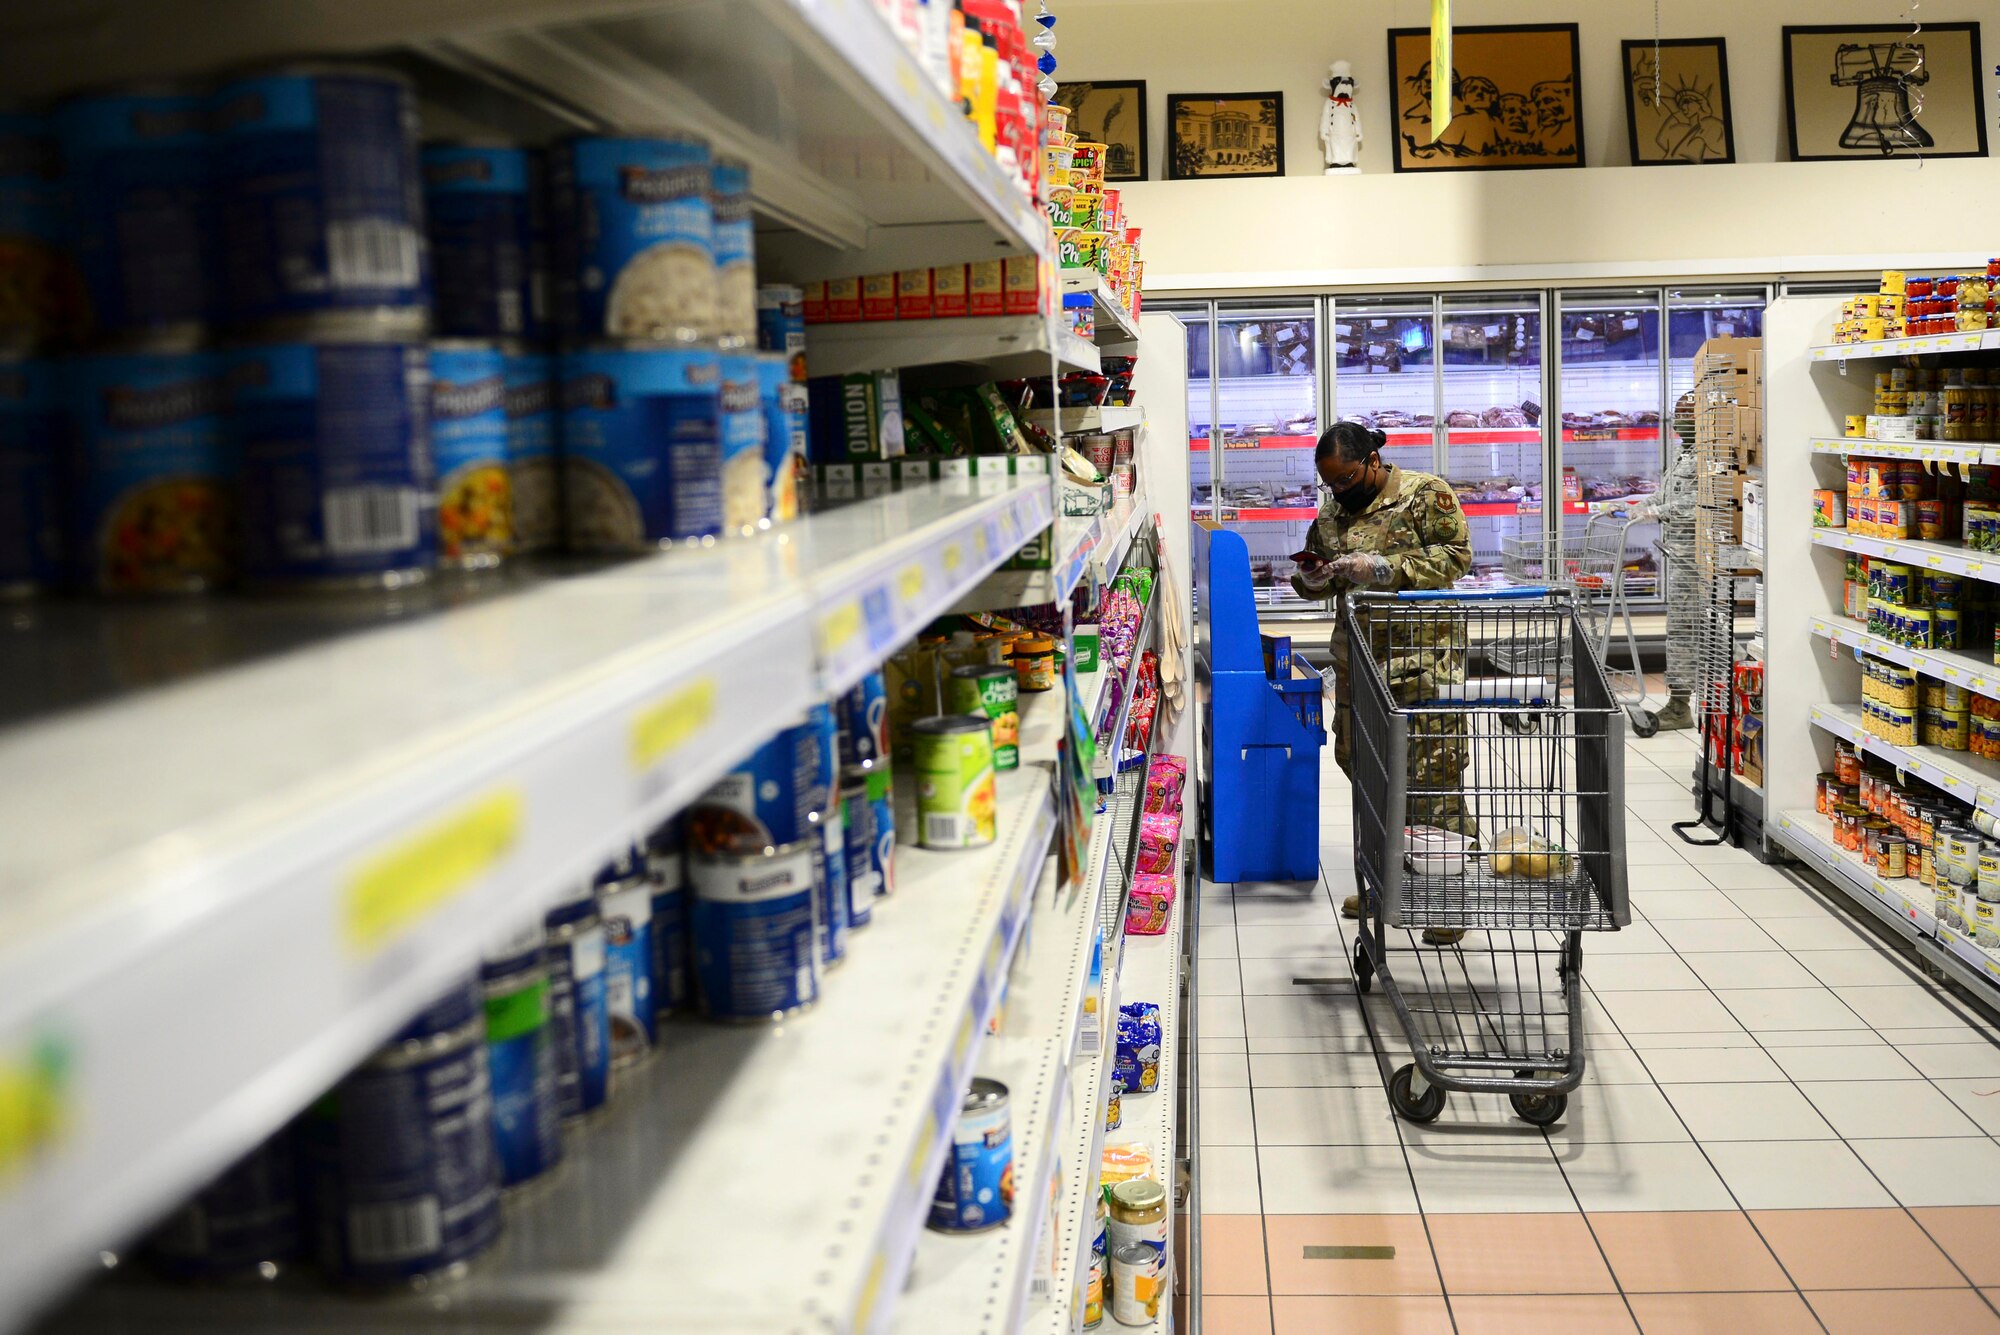 U.S. Air Force Tech. Sgt. Kahlia Rainer, volunteer, checks a grocery list at the commissary on Aviano Air Base, Italy, April 18, 2020. Spouses and dependents of active duty members unable to shop for themselves due to restrictions in place during the ongoing battle against COVID-19 were able to sign up for the grocery delivery service and send a shopping list to their volunteer. (U.S. Air Force photo by Tech. Sgt. Tory Cusimano)